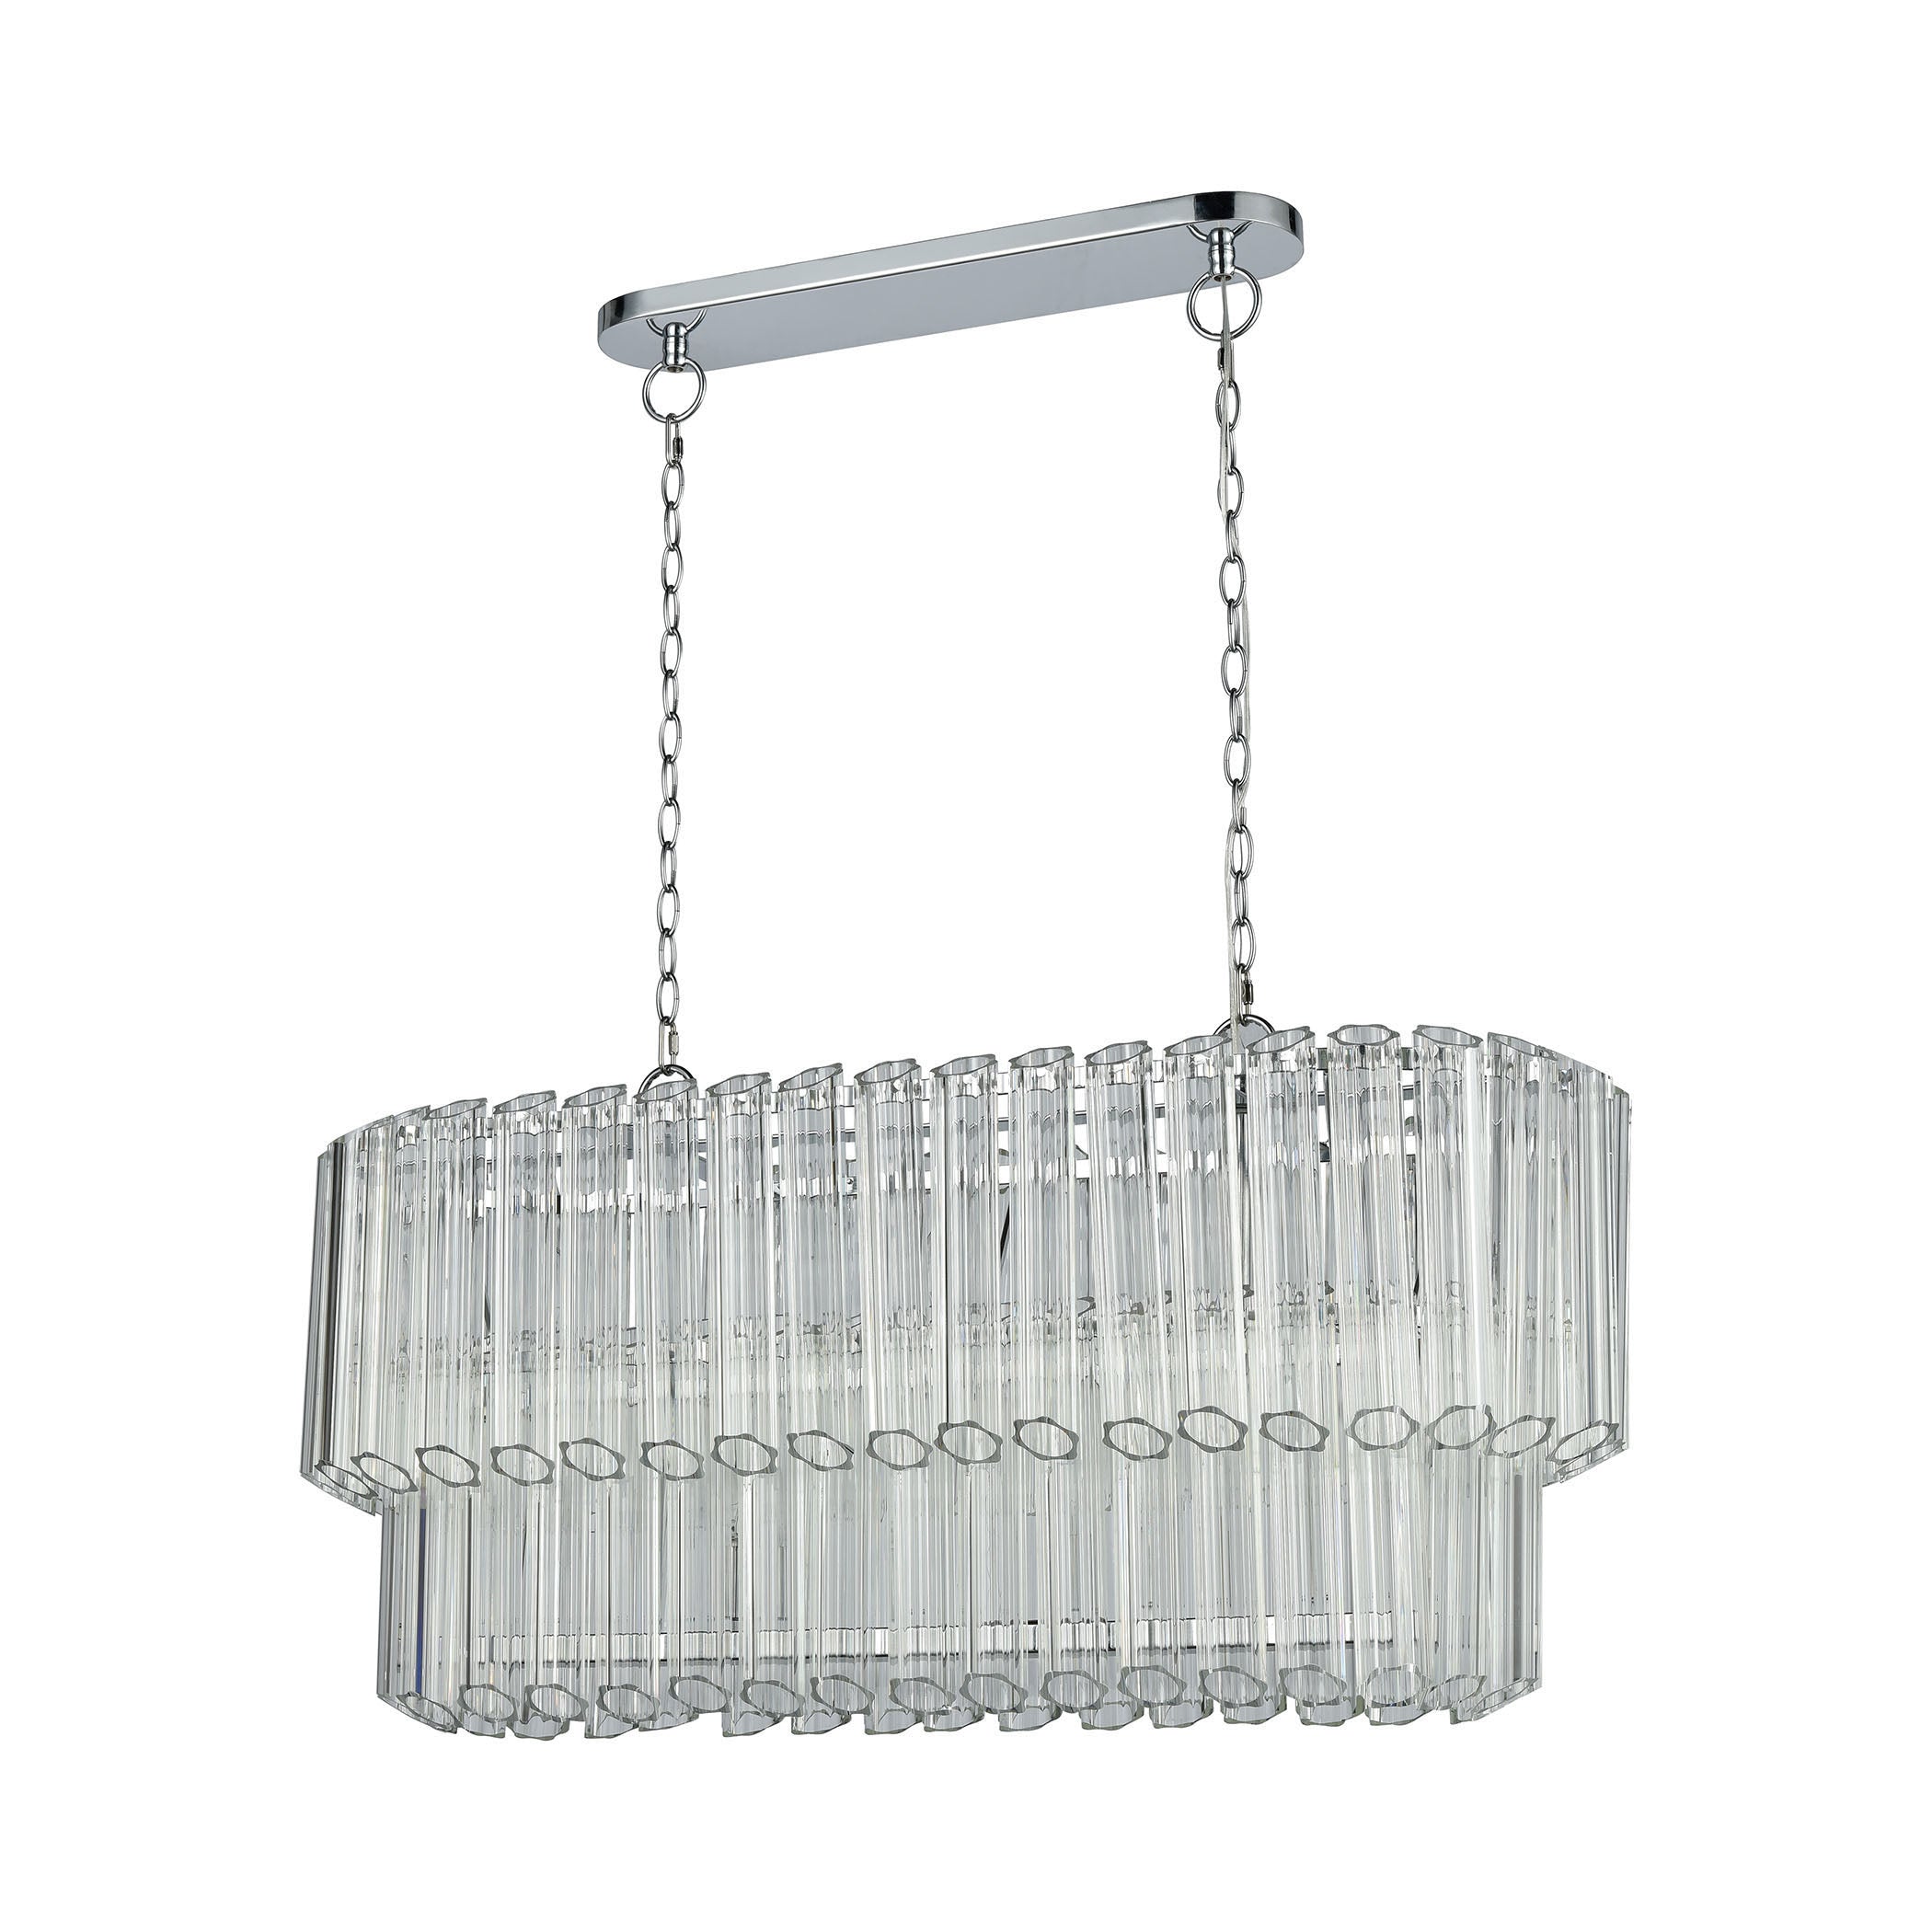 ELK Lighting 46314/5 Carrington 5-Light Linear Chandelier in Polished Chrome with Clear Glass